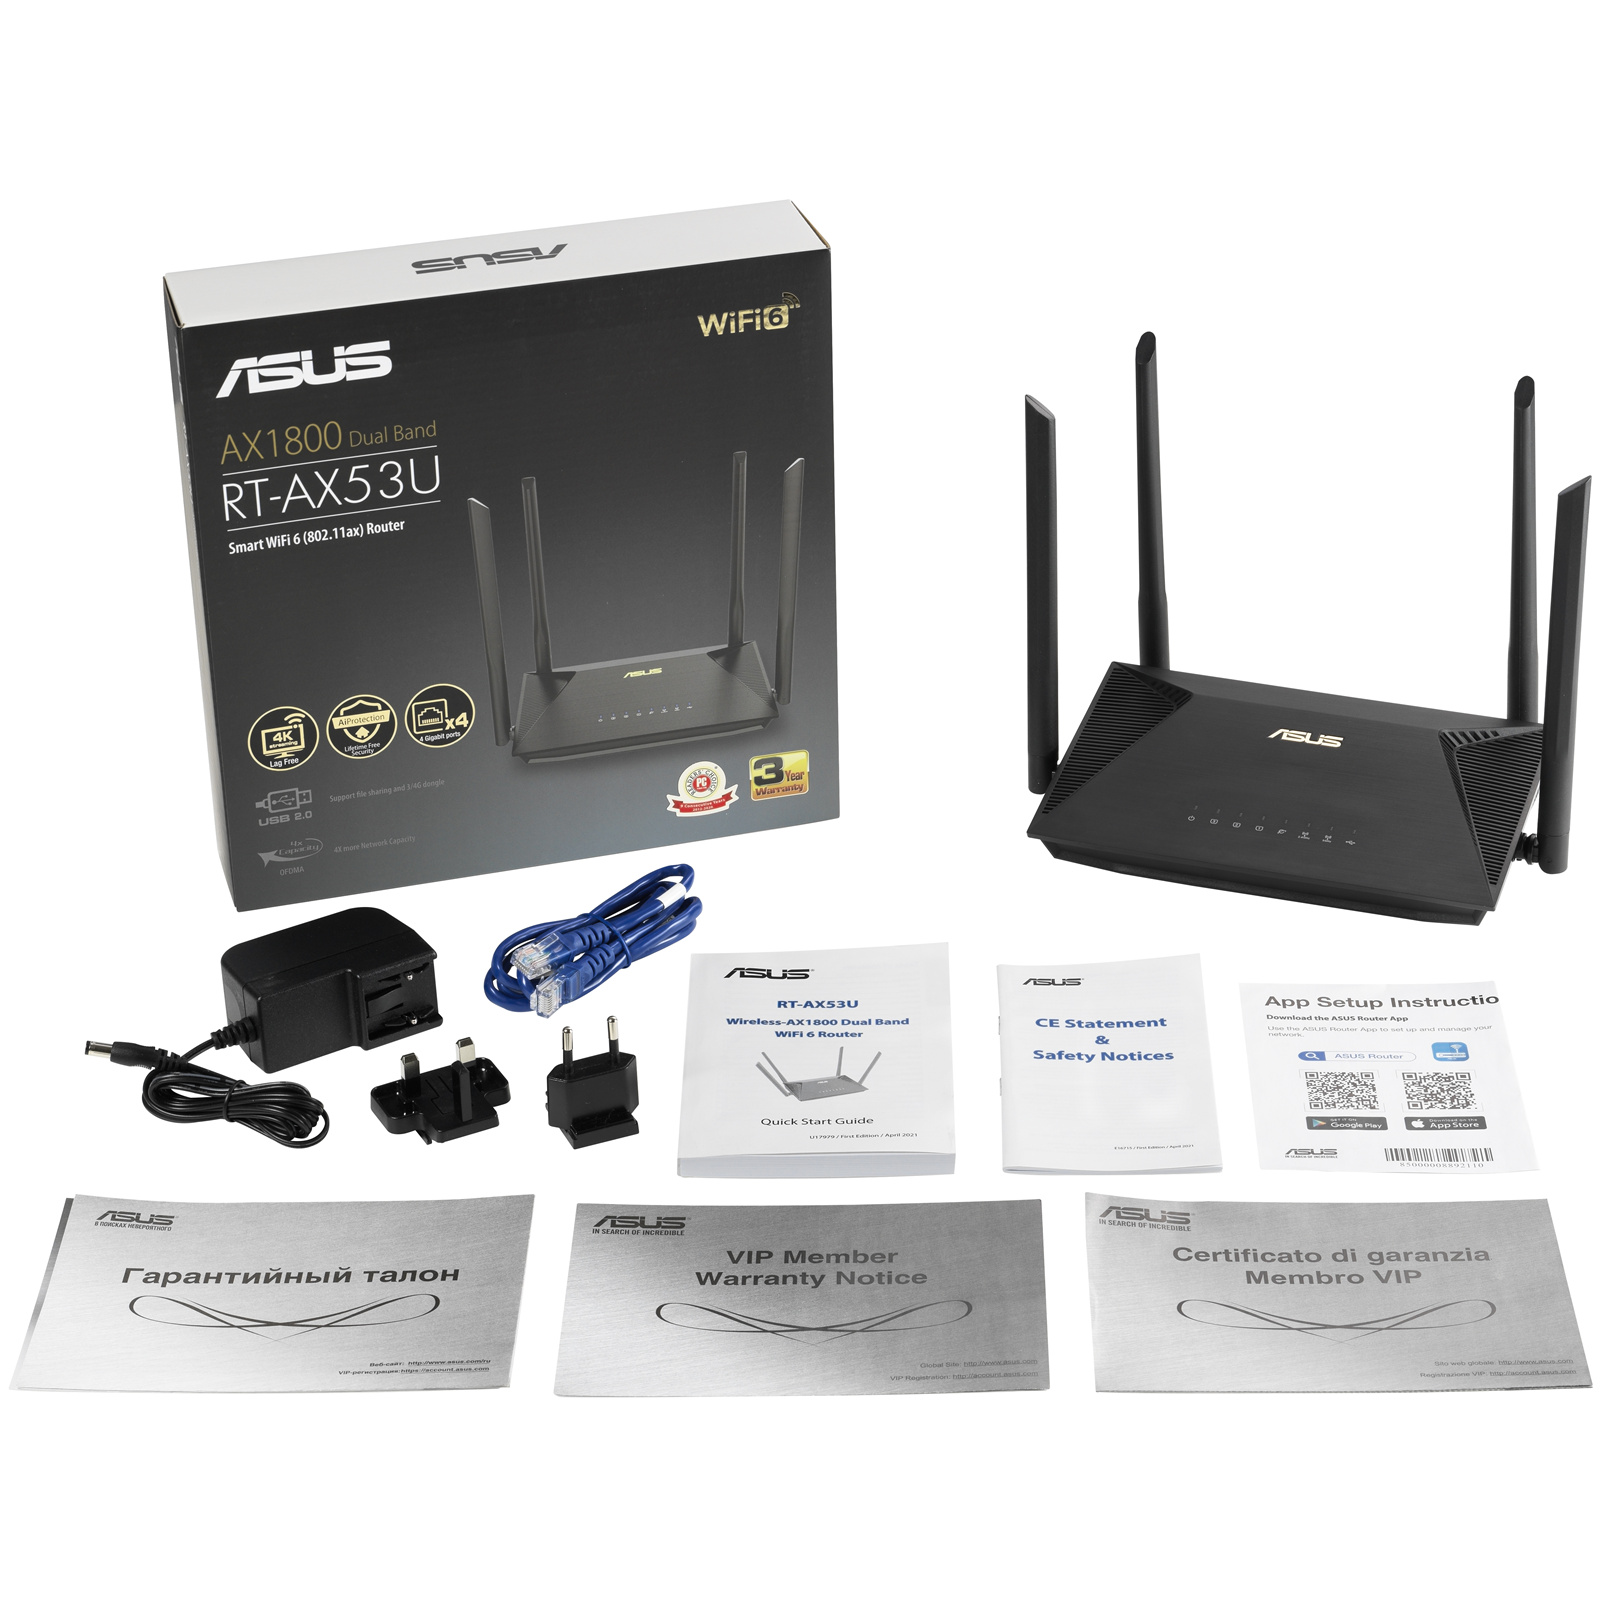 -AX53U RT-AX53U online Band Buy AX Router... ) Extendable Dual ASUS the (AX1800) WiFi RT 6 (